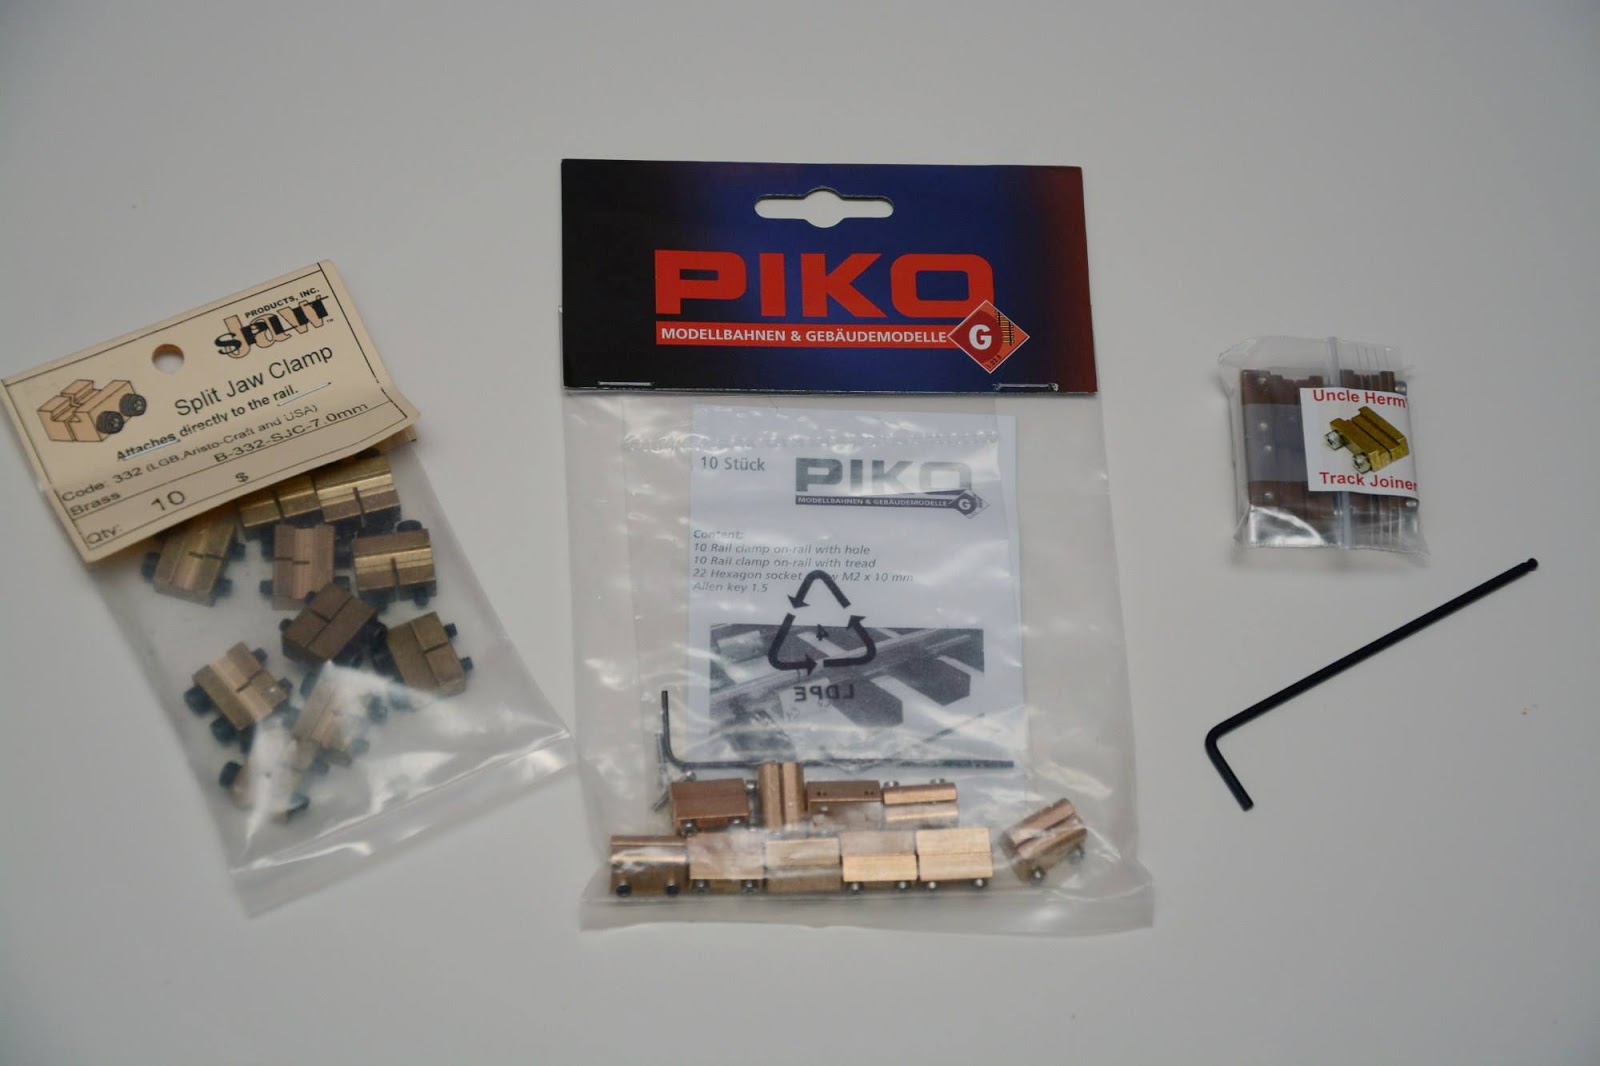 ON RAIL PIKO 35293 PACKAGE OF RAIL CLAMPS 10 PCS G-SCALE 